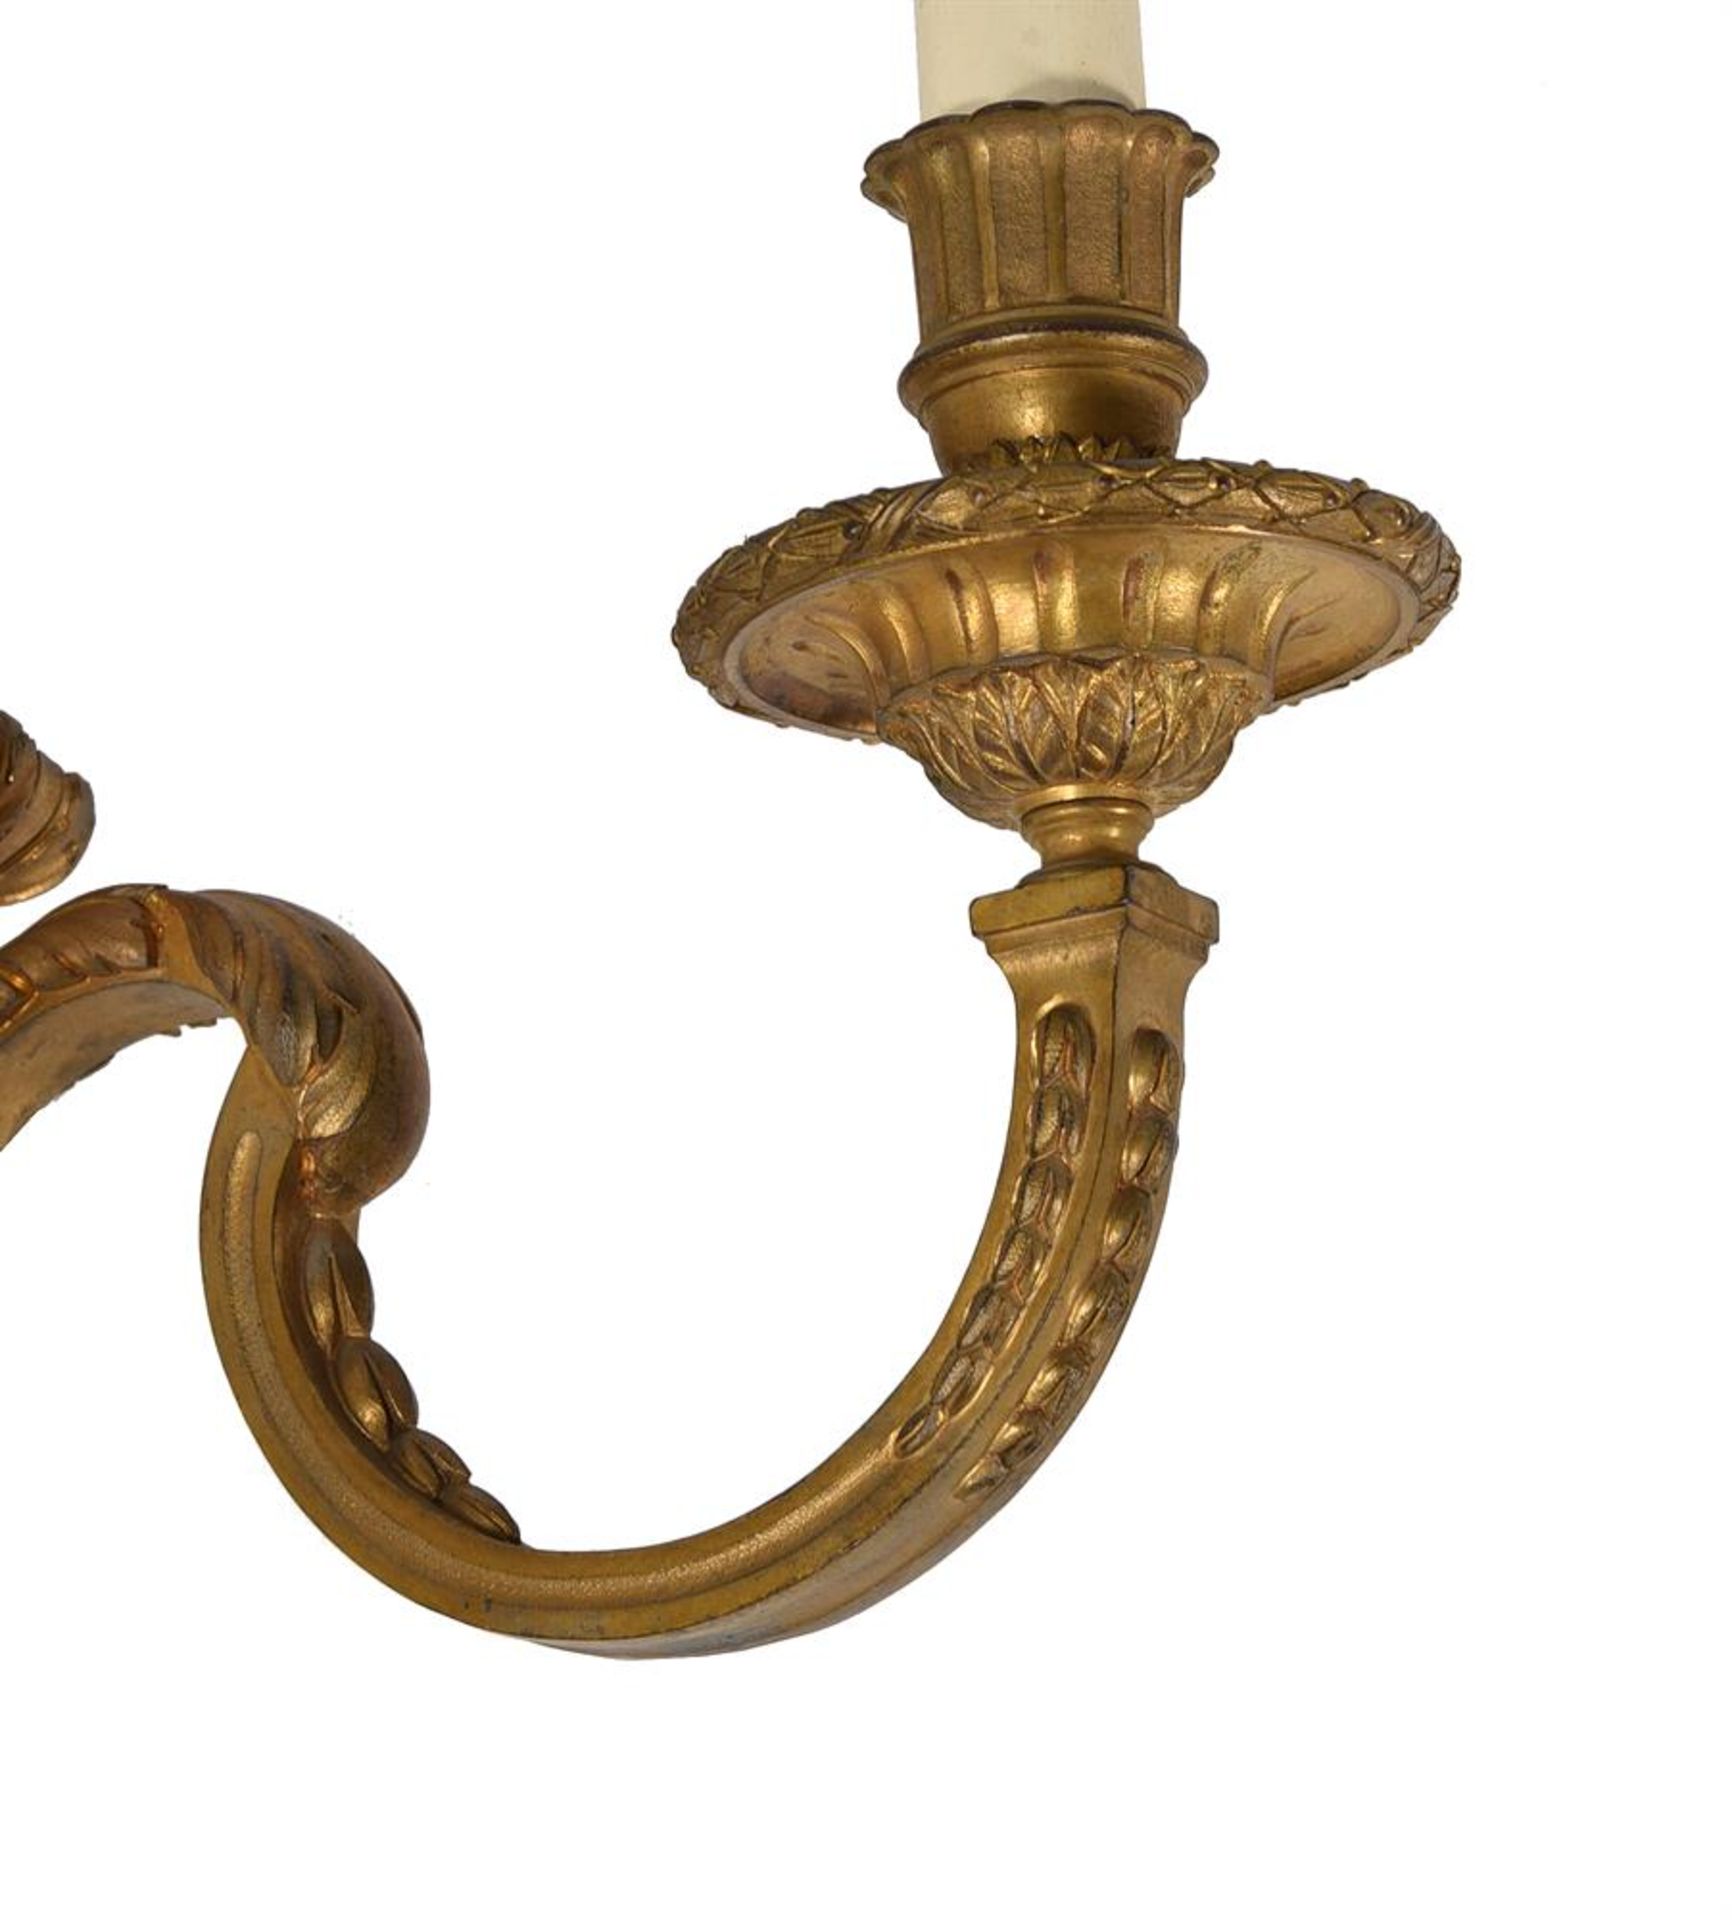 A SET OF FOUR LARGE ORMOLU TWIN LIGHT WALL APPLIQUES, FRENCH, 19TH CENTURY - Image 4 of 4